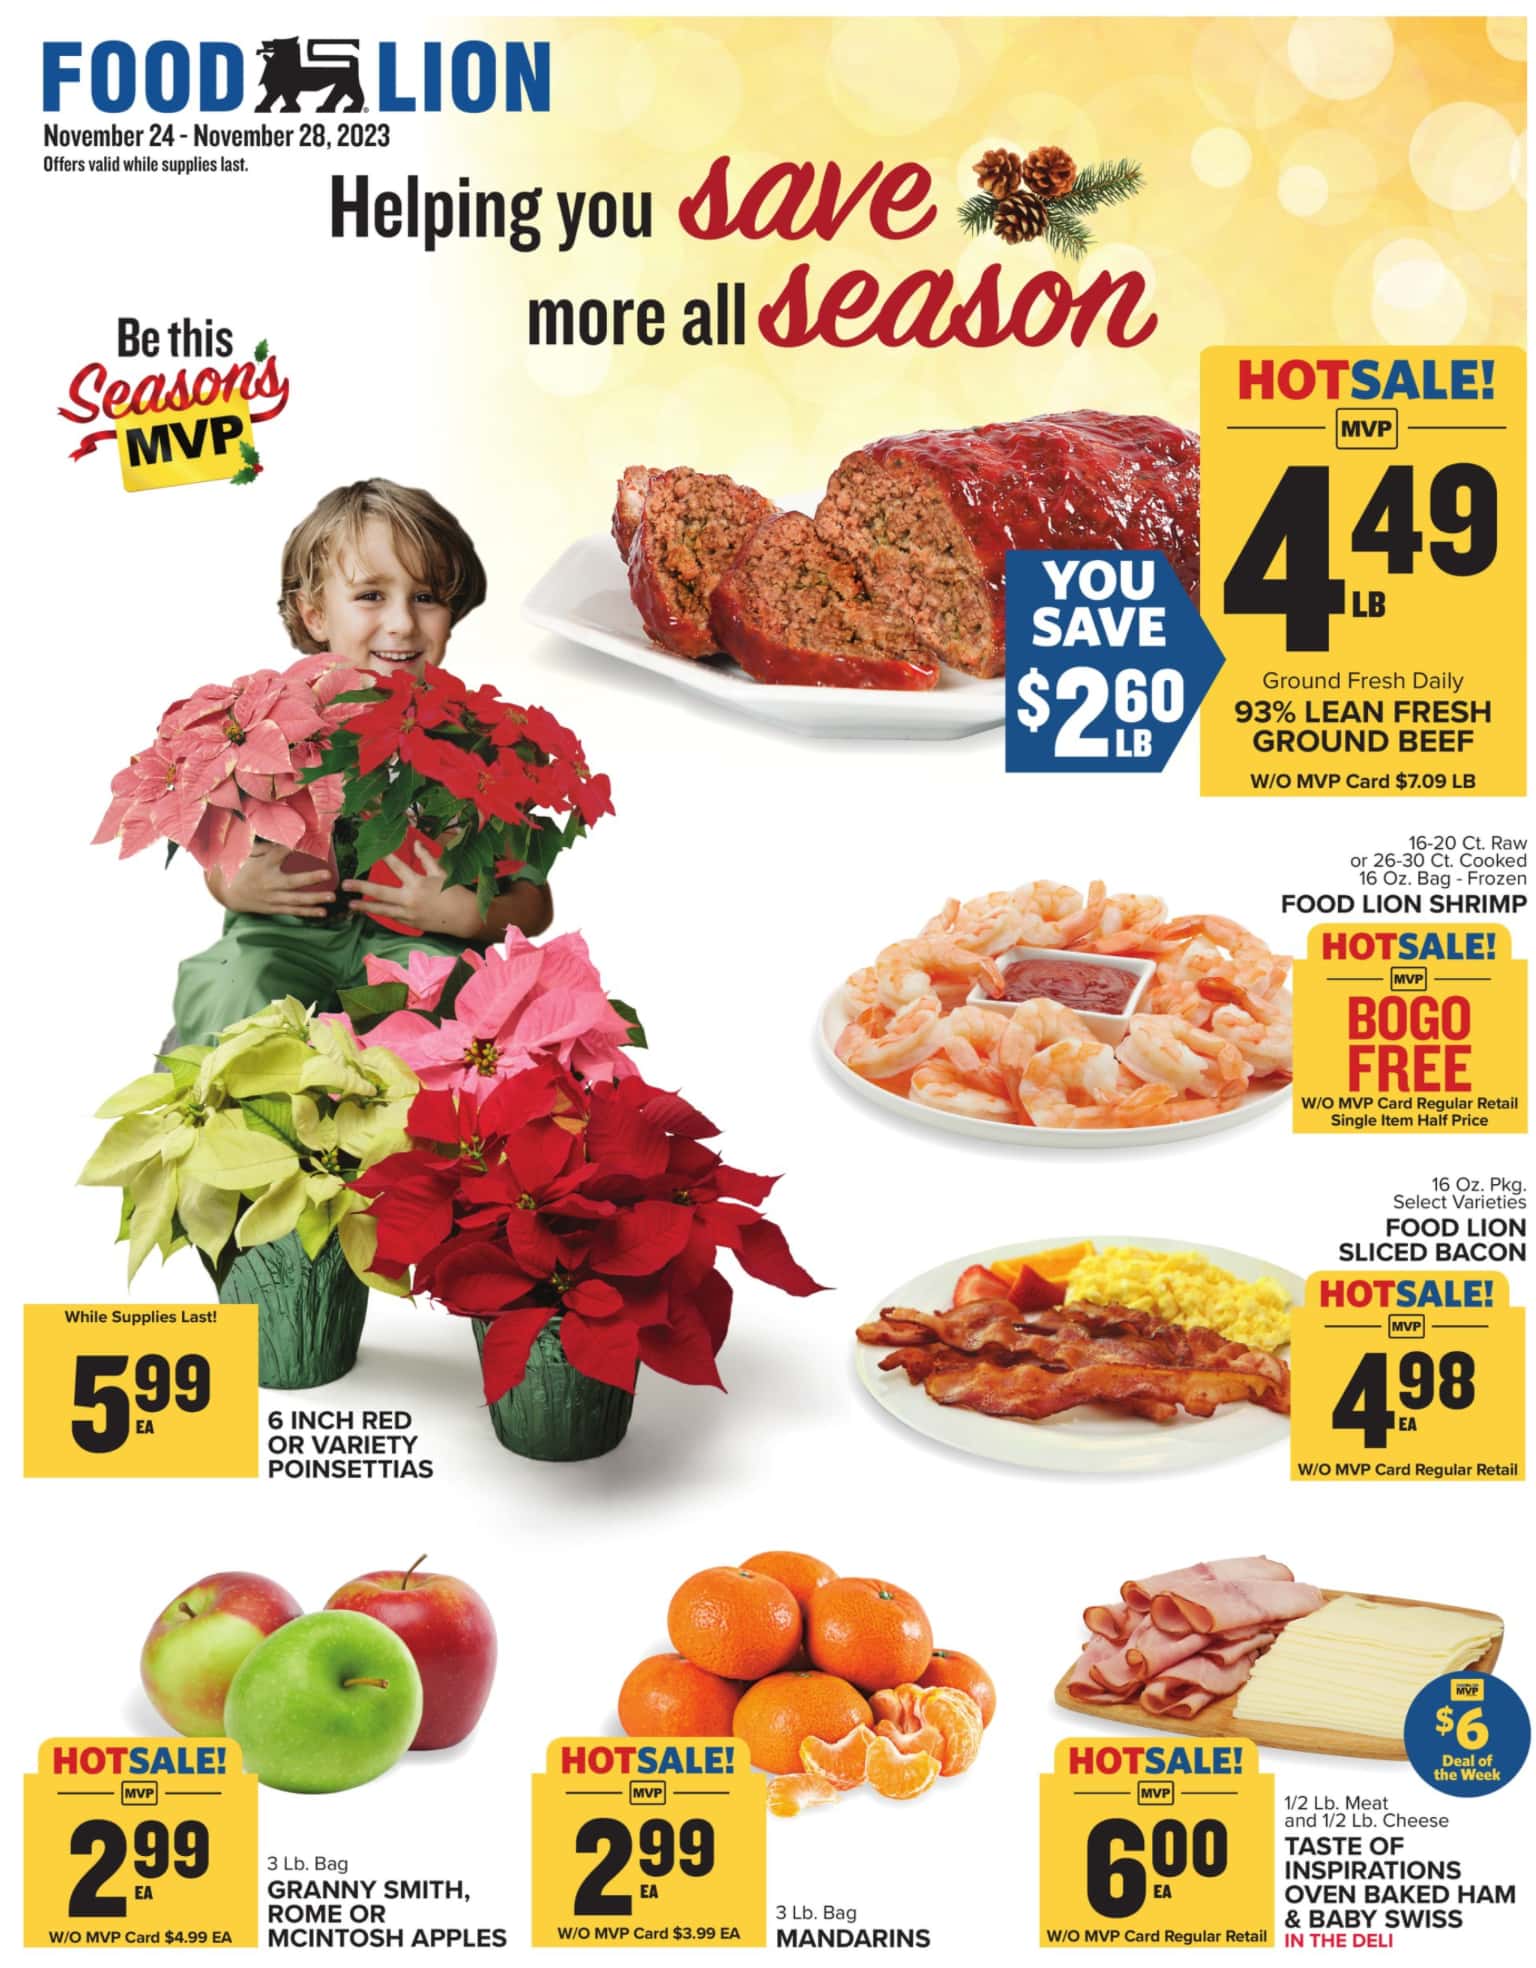 Food Lion Weekly Ad December 13 to December 19, 2023 1 – food lion ad 1 1